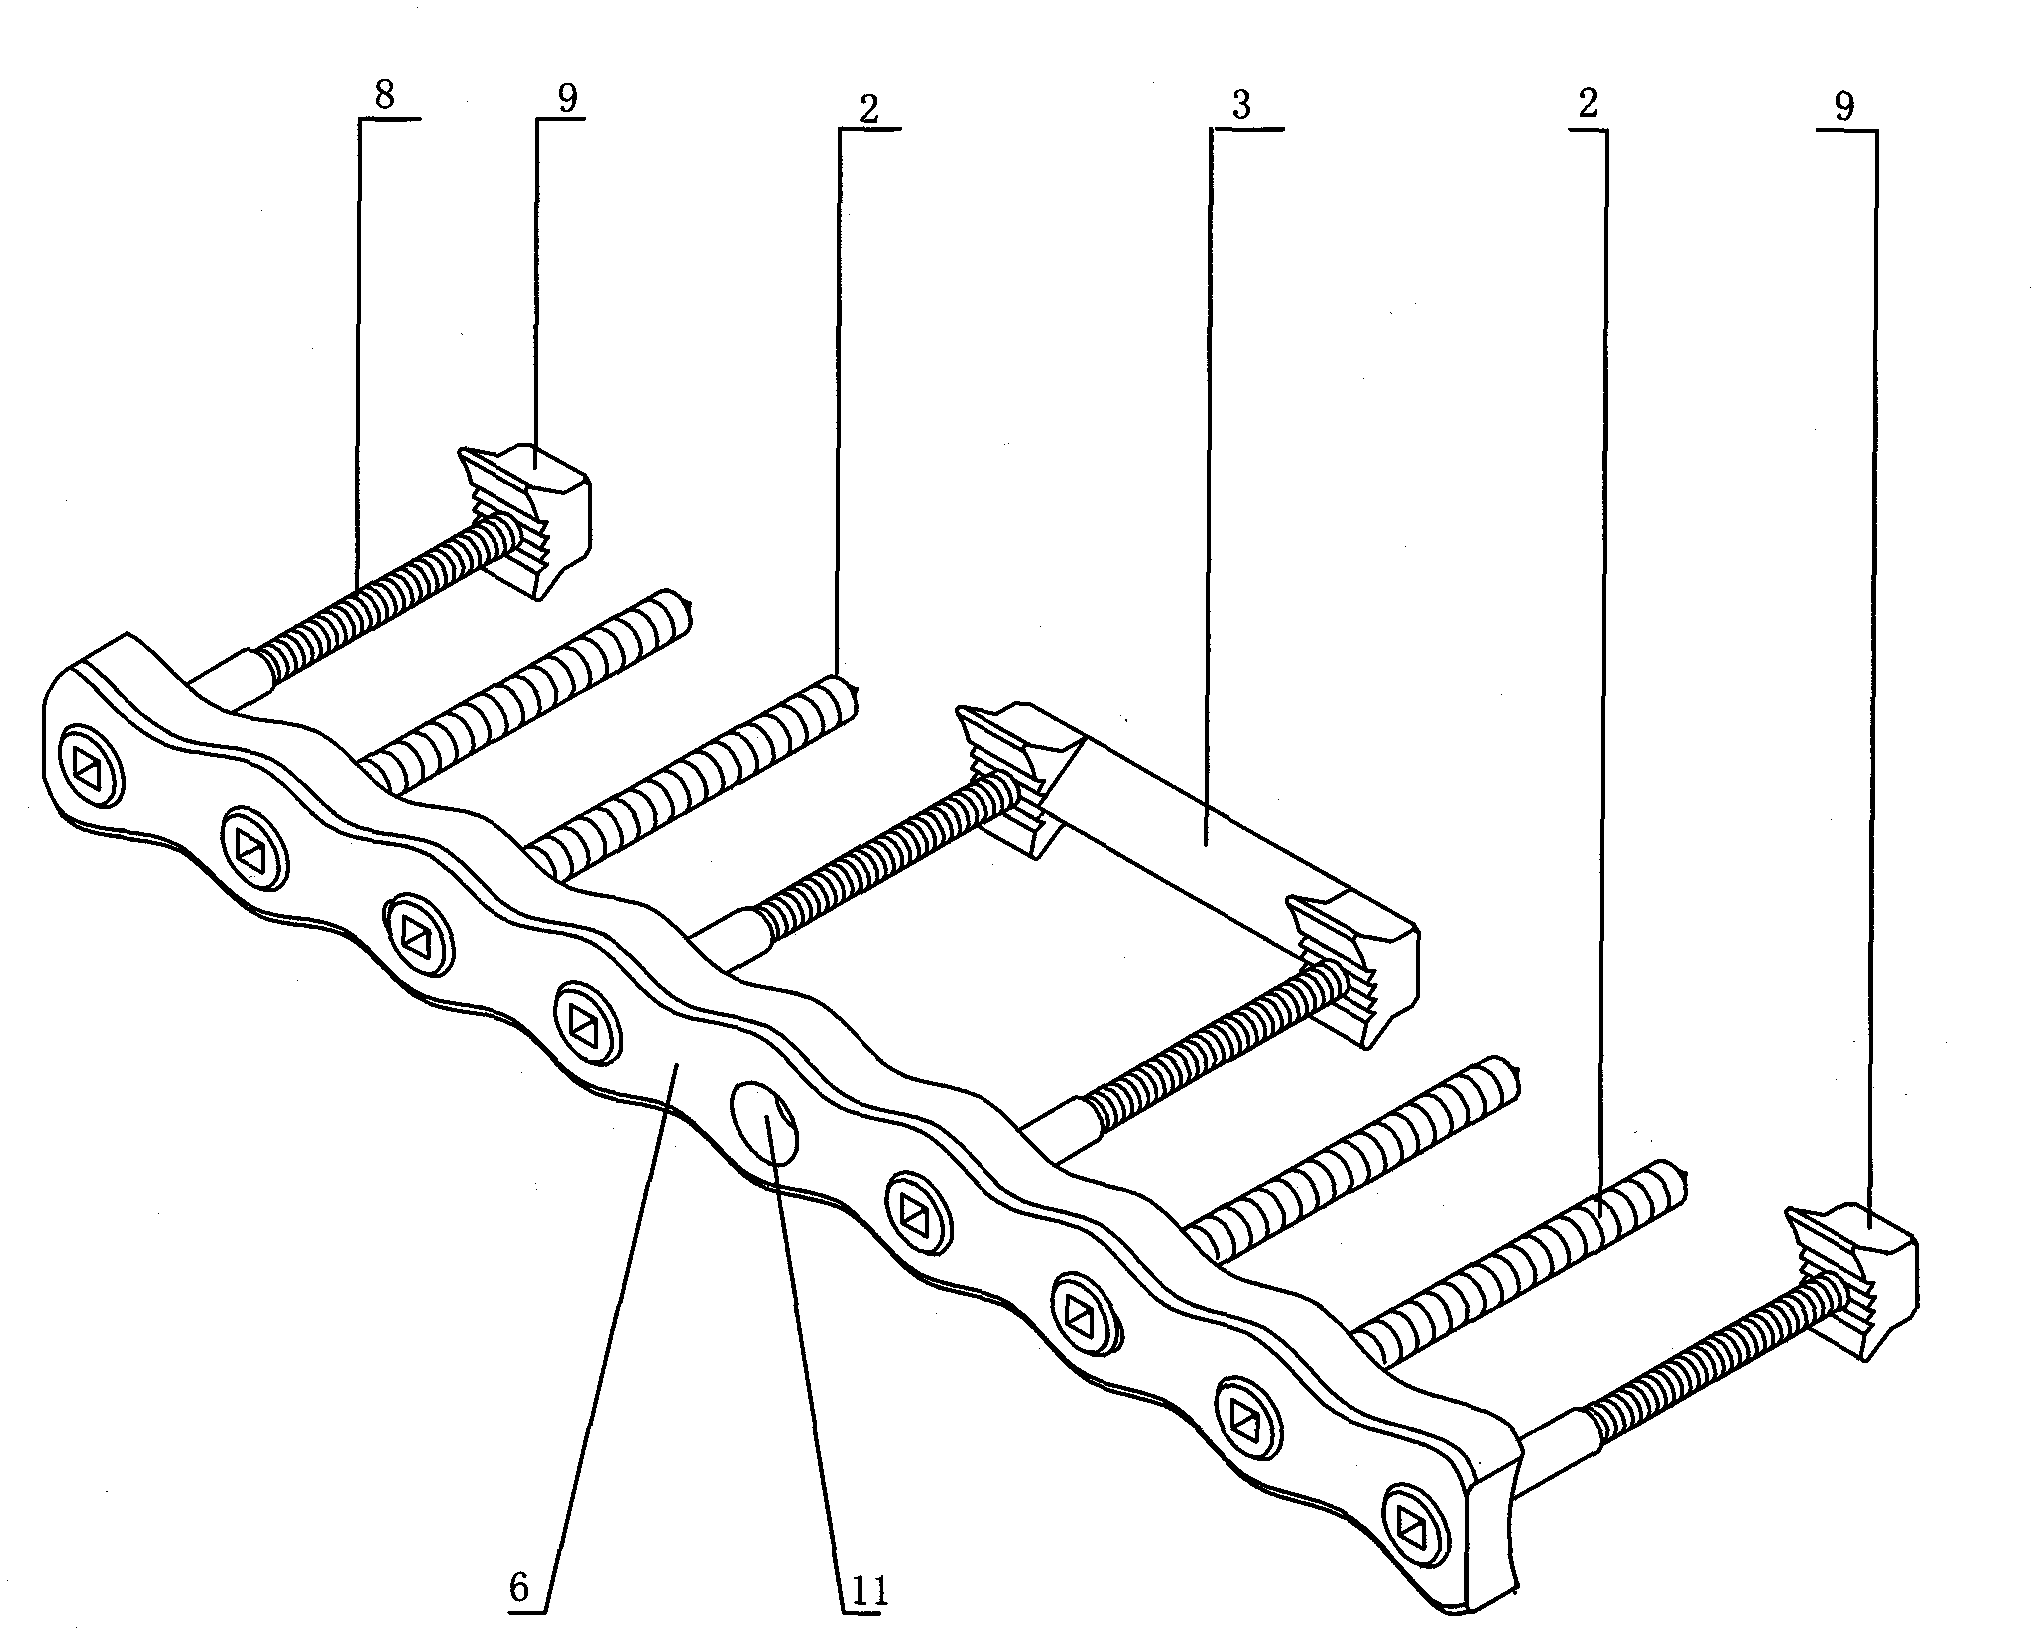 Femoral shaft fracture internally fixing instrument